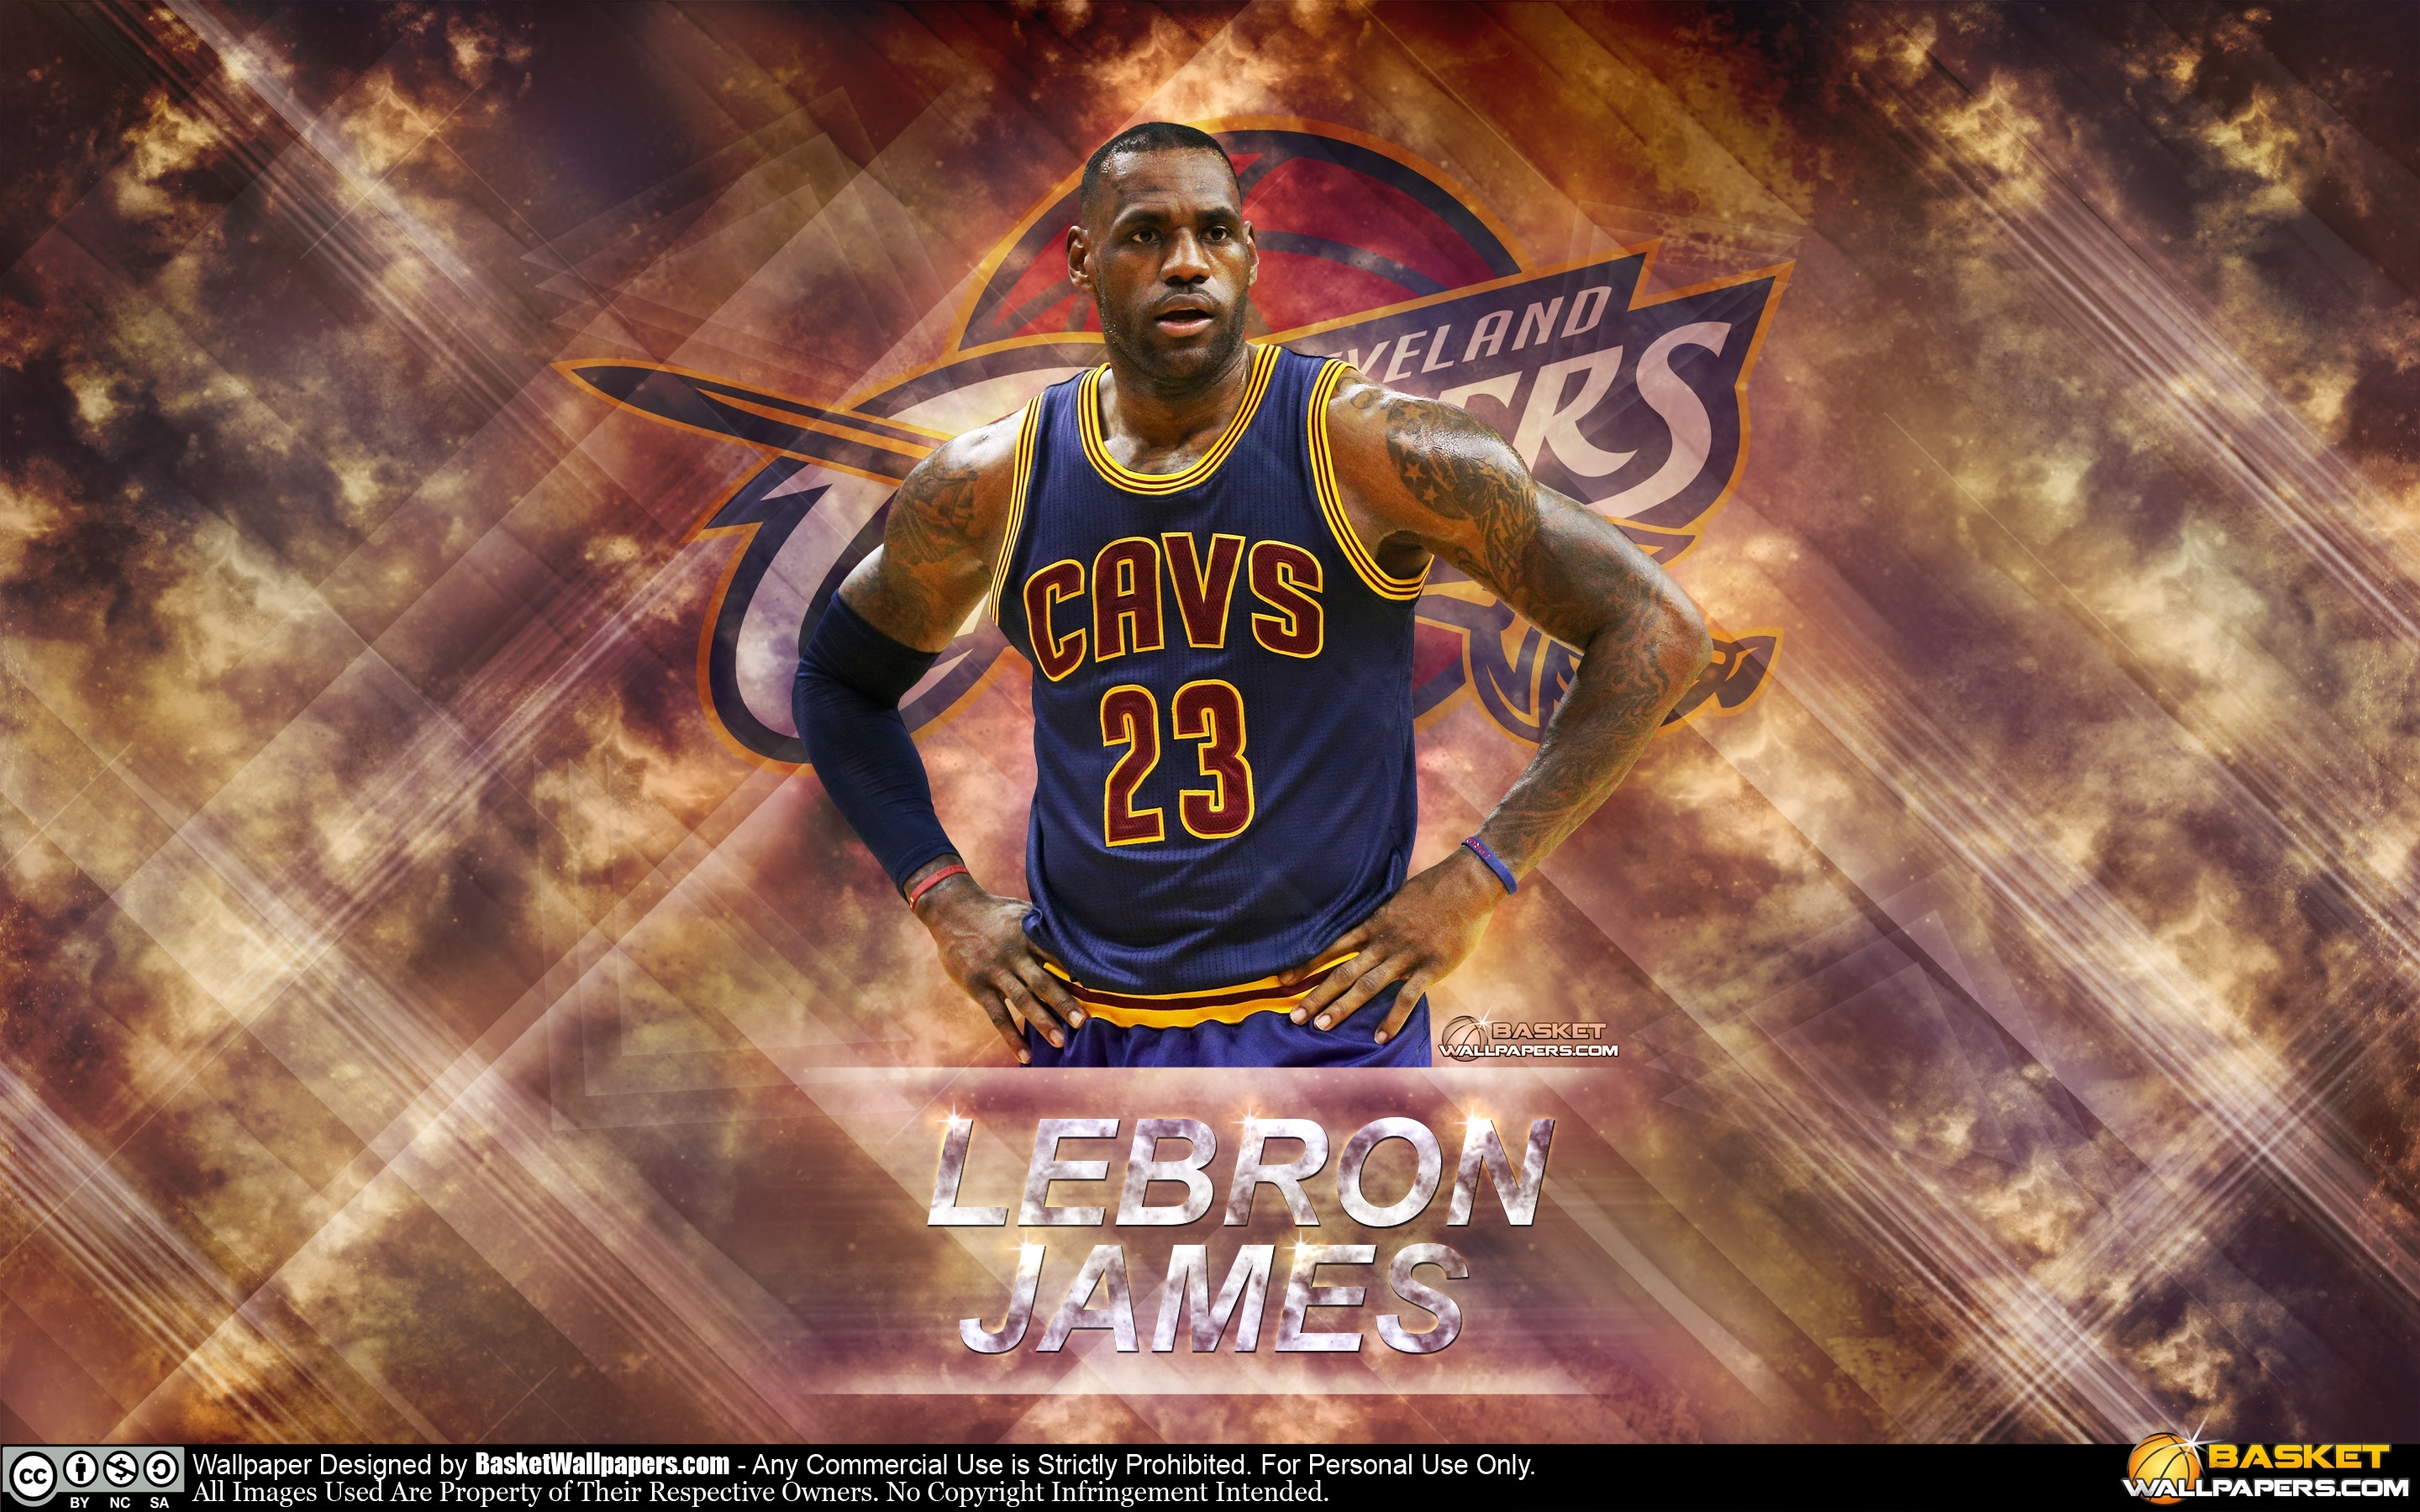 10 Top Lebron James Best Wallpaper FULL HD 1920×1080 For PC Background